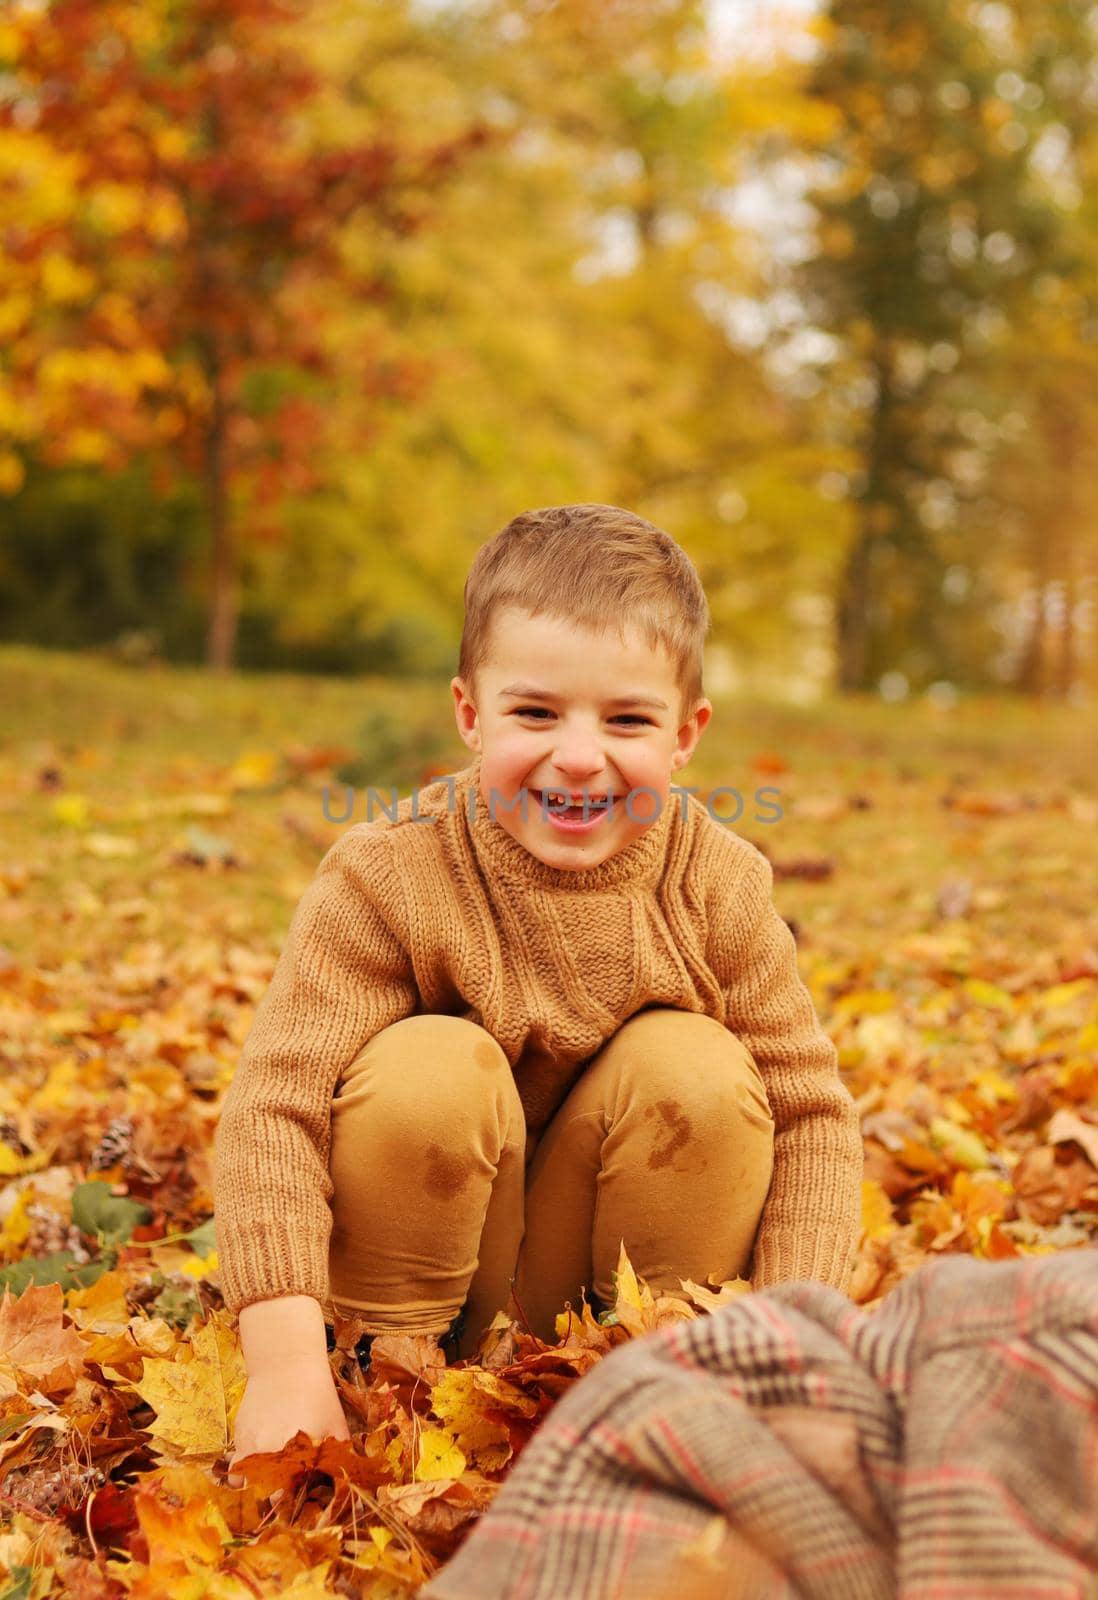 Outdoor fun in autumn. Child playing with autumn fallen leaves in park. Happy little boy. by creativebird